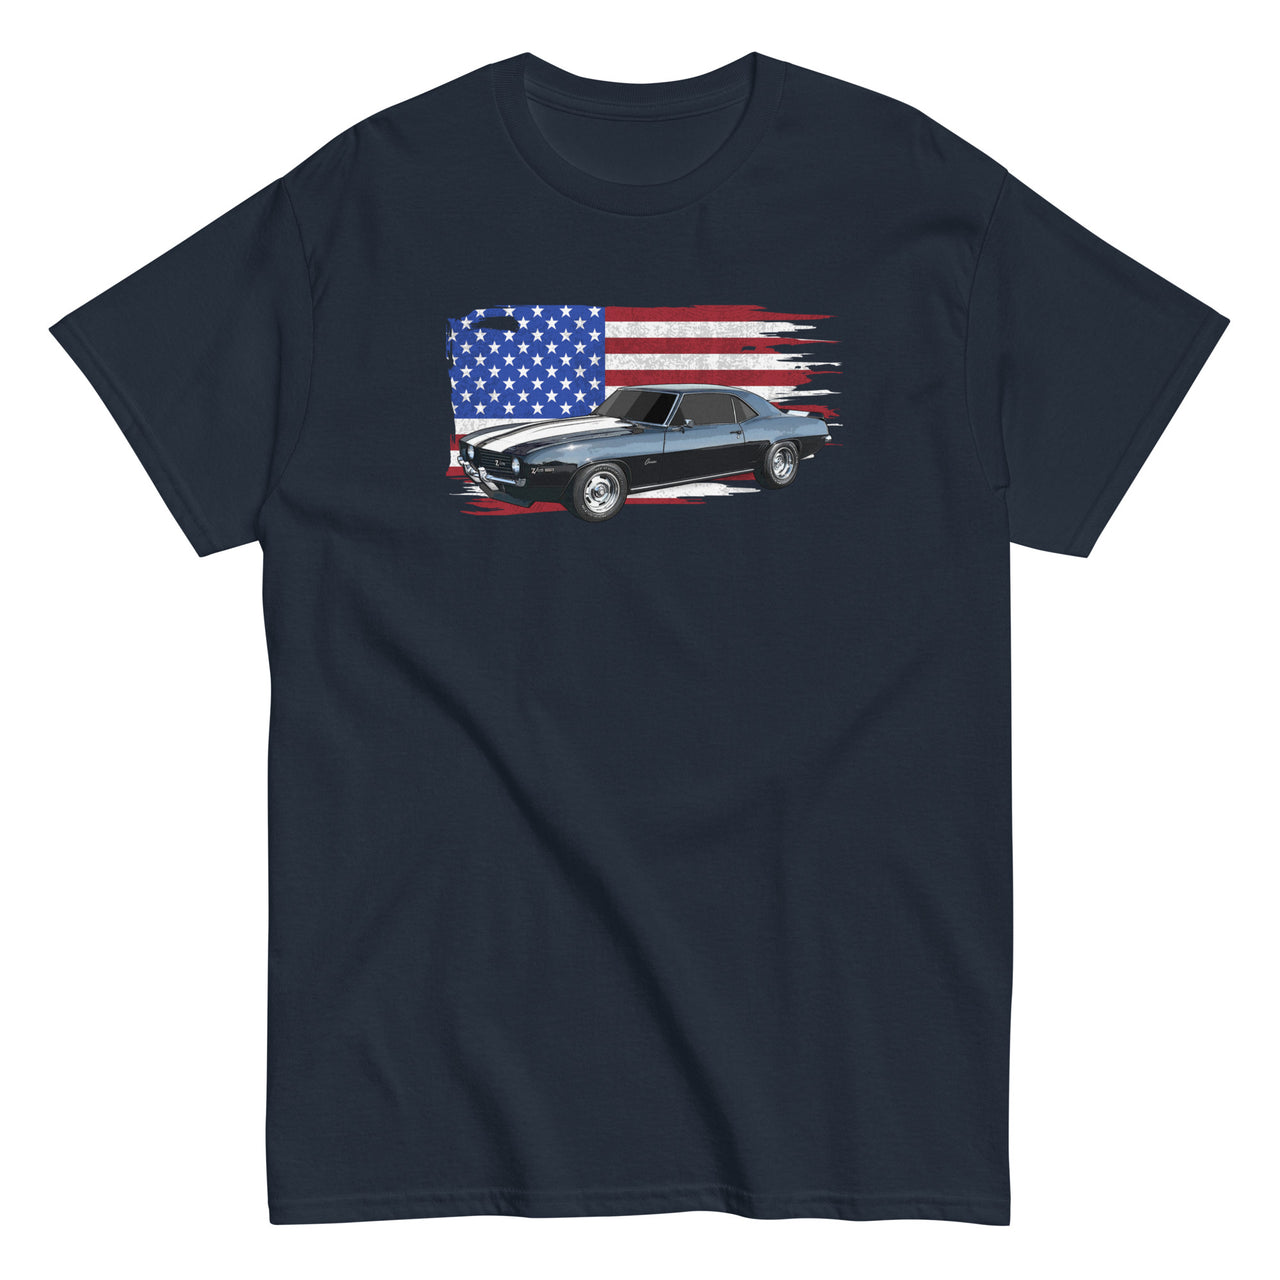 69 Camaro T-Shirt With American Flag Background - navy